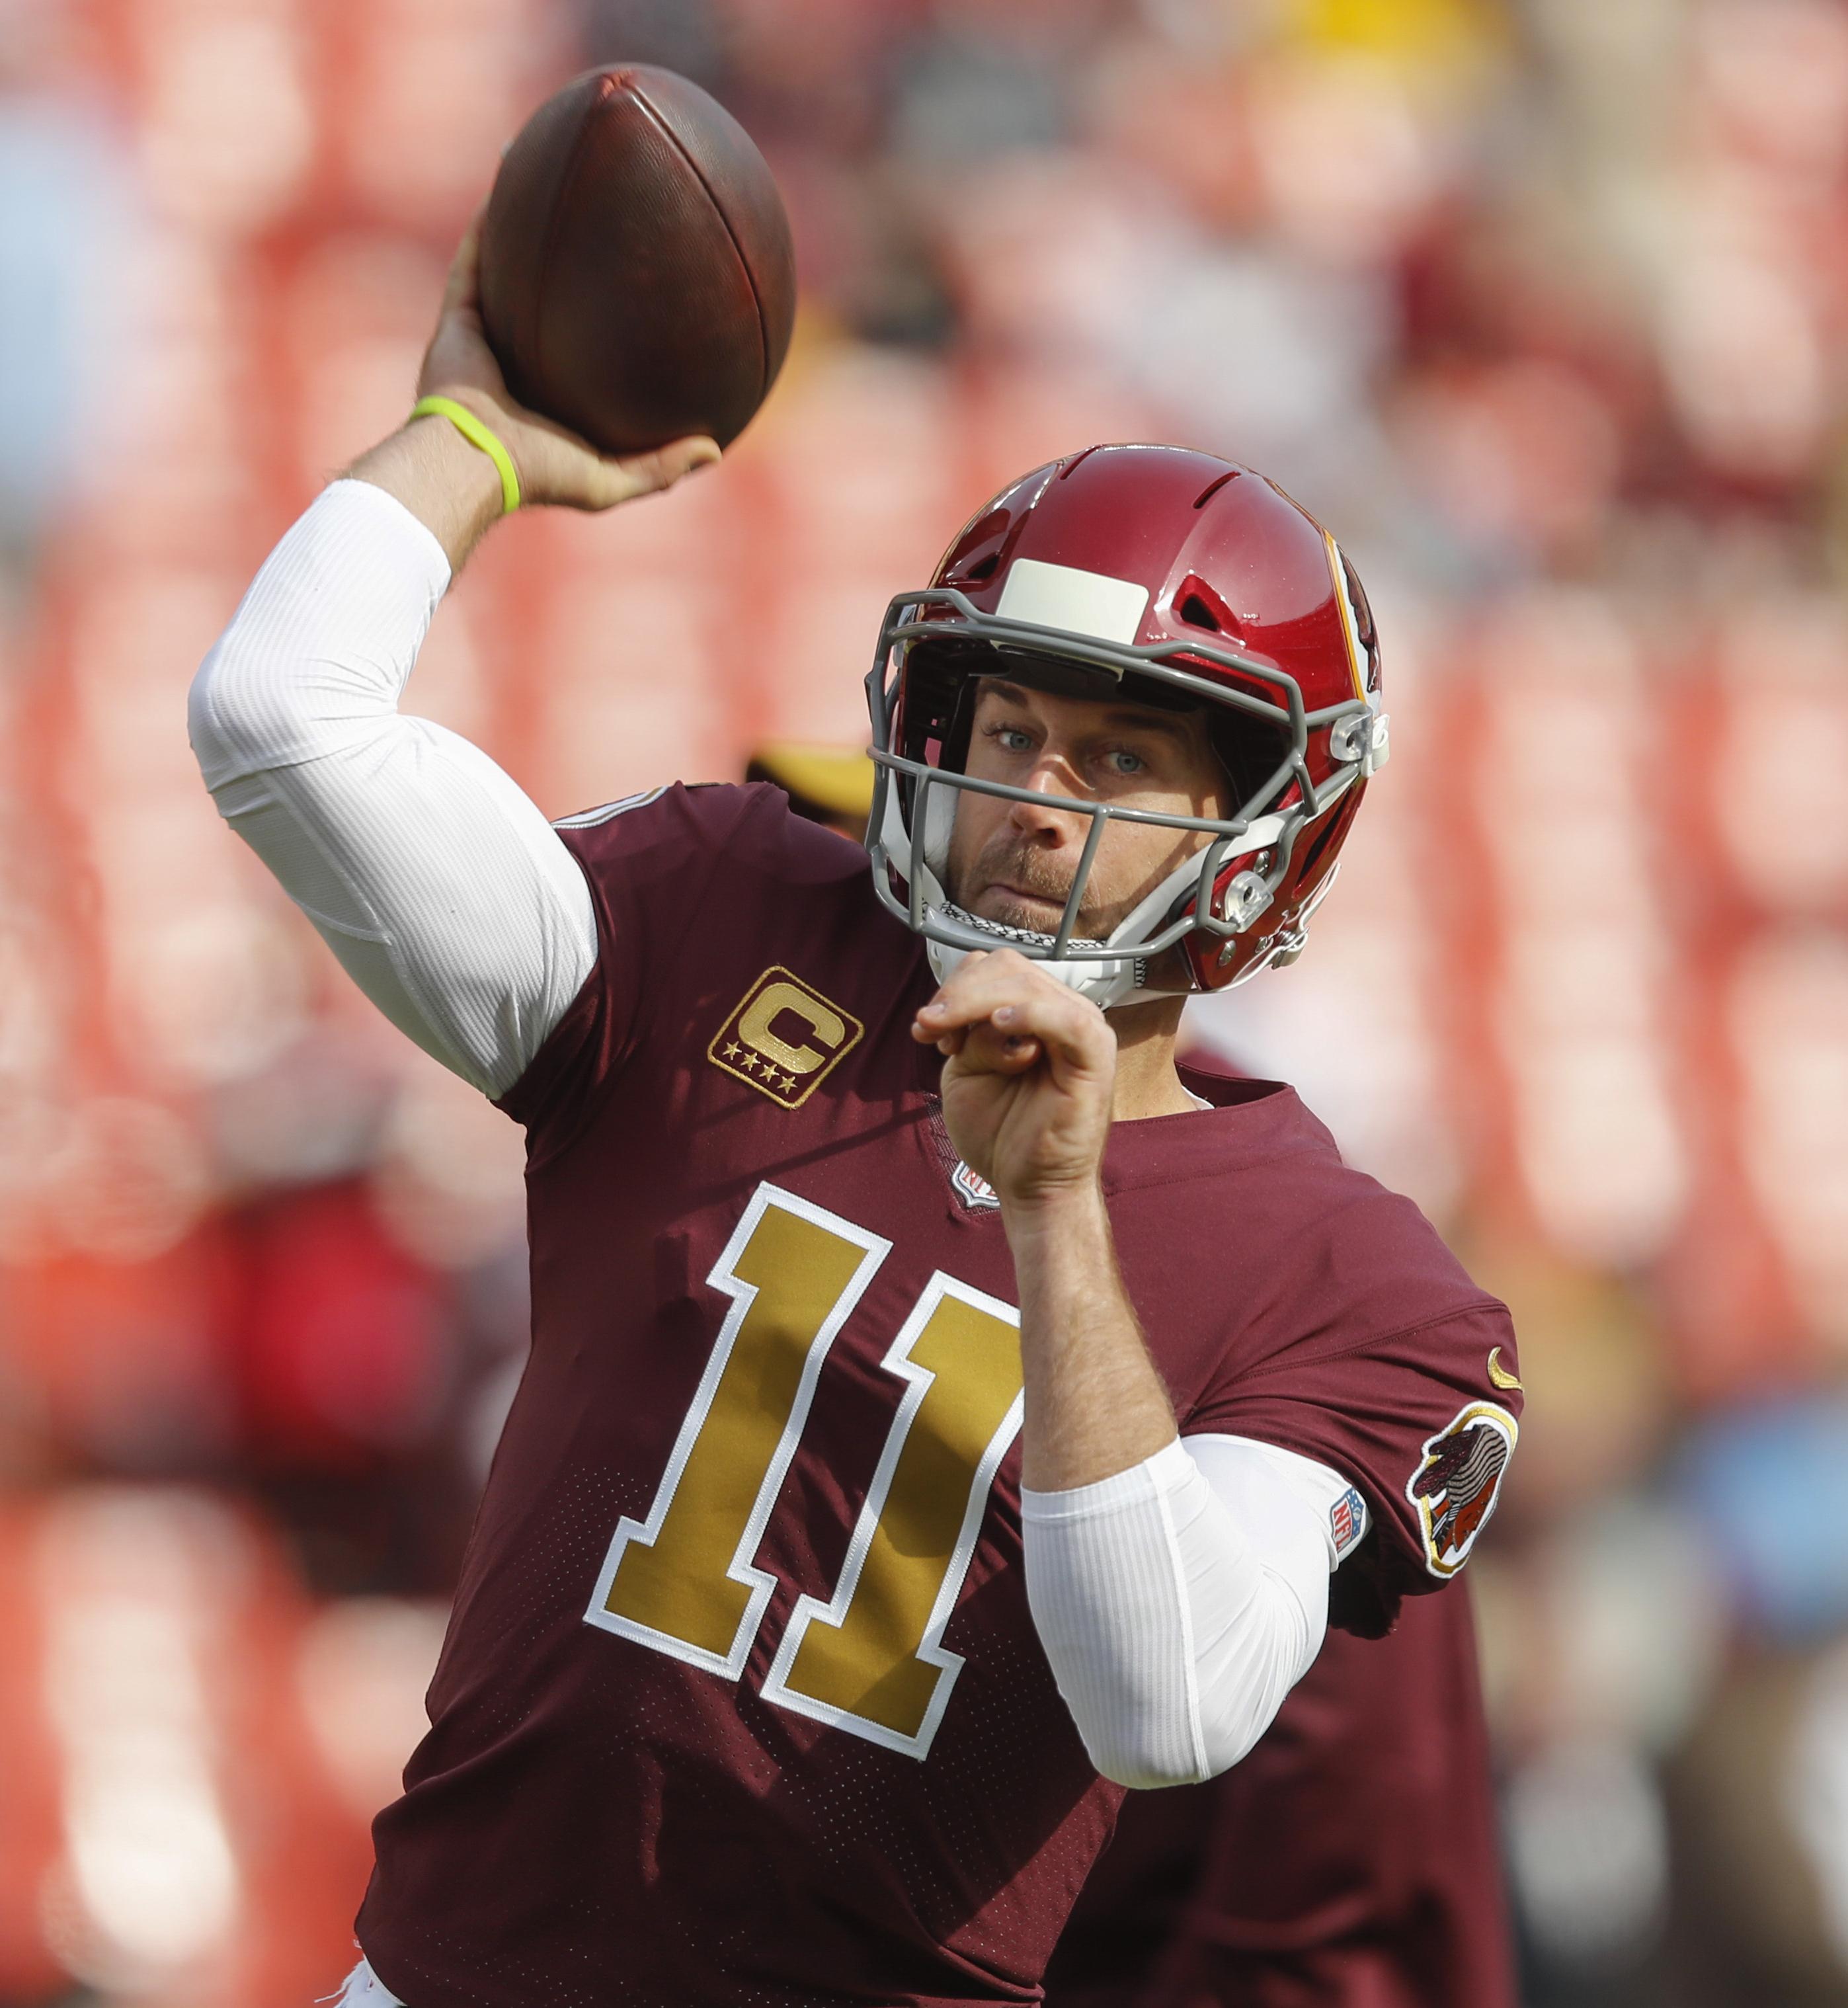 Redskins QB Alex Smith on playing again ‘That’s the plan’ The